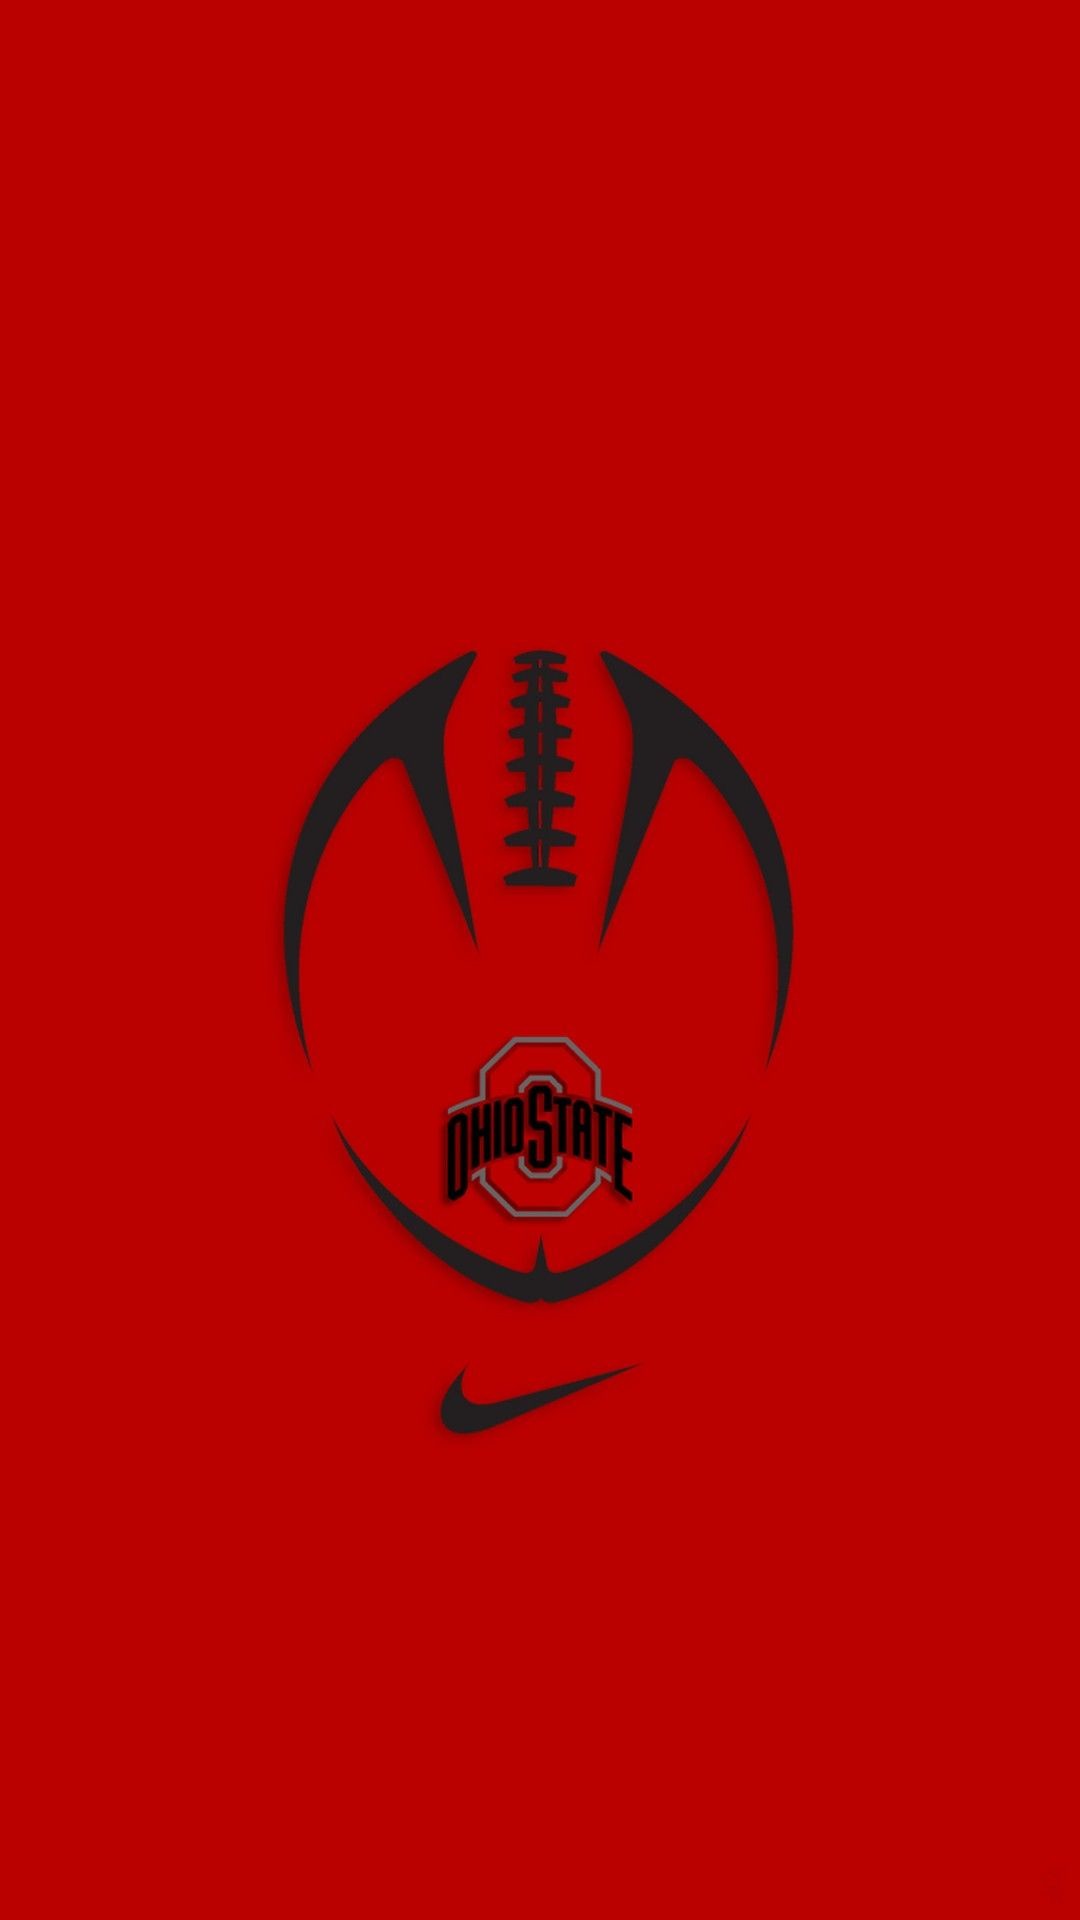 1080x1920 Ohio State Buckeyes Wallpaper iPhone best is high definition iPhone  wallpaper 2018. You can make this wallpaper for your iPhone 5, 6, 7, 8, X  backgrounds, ...